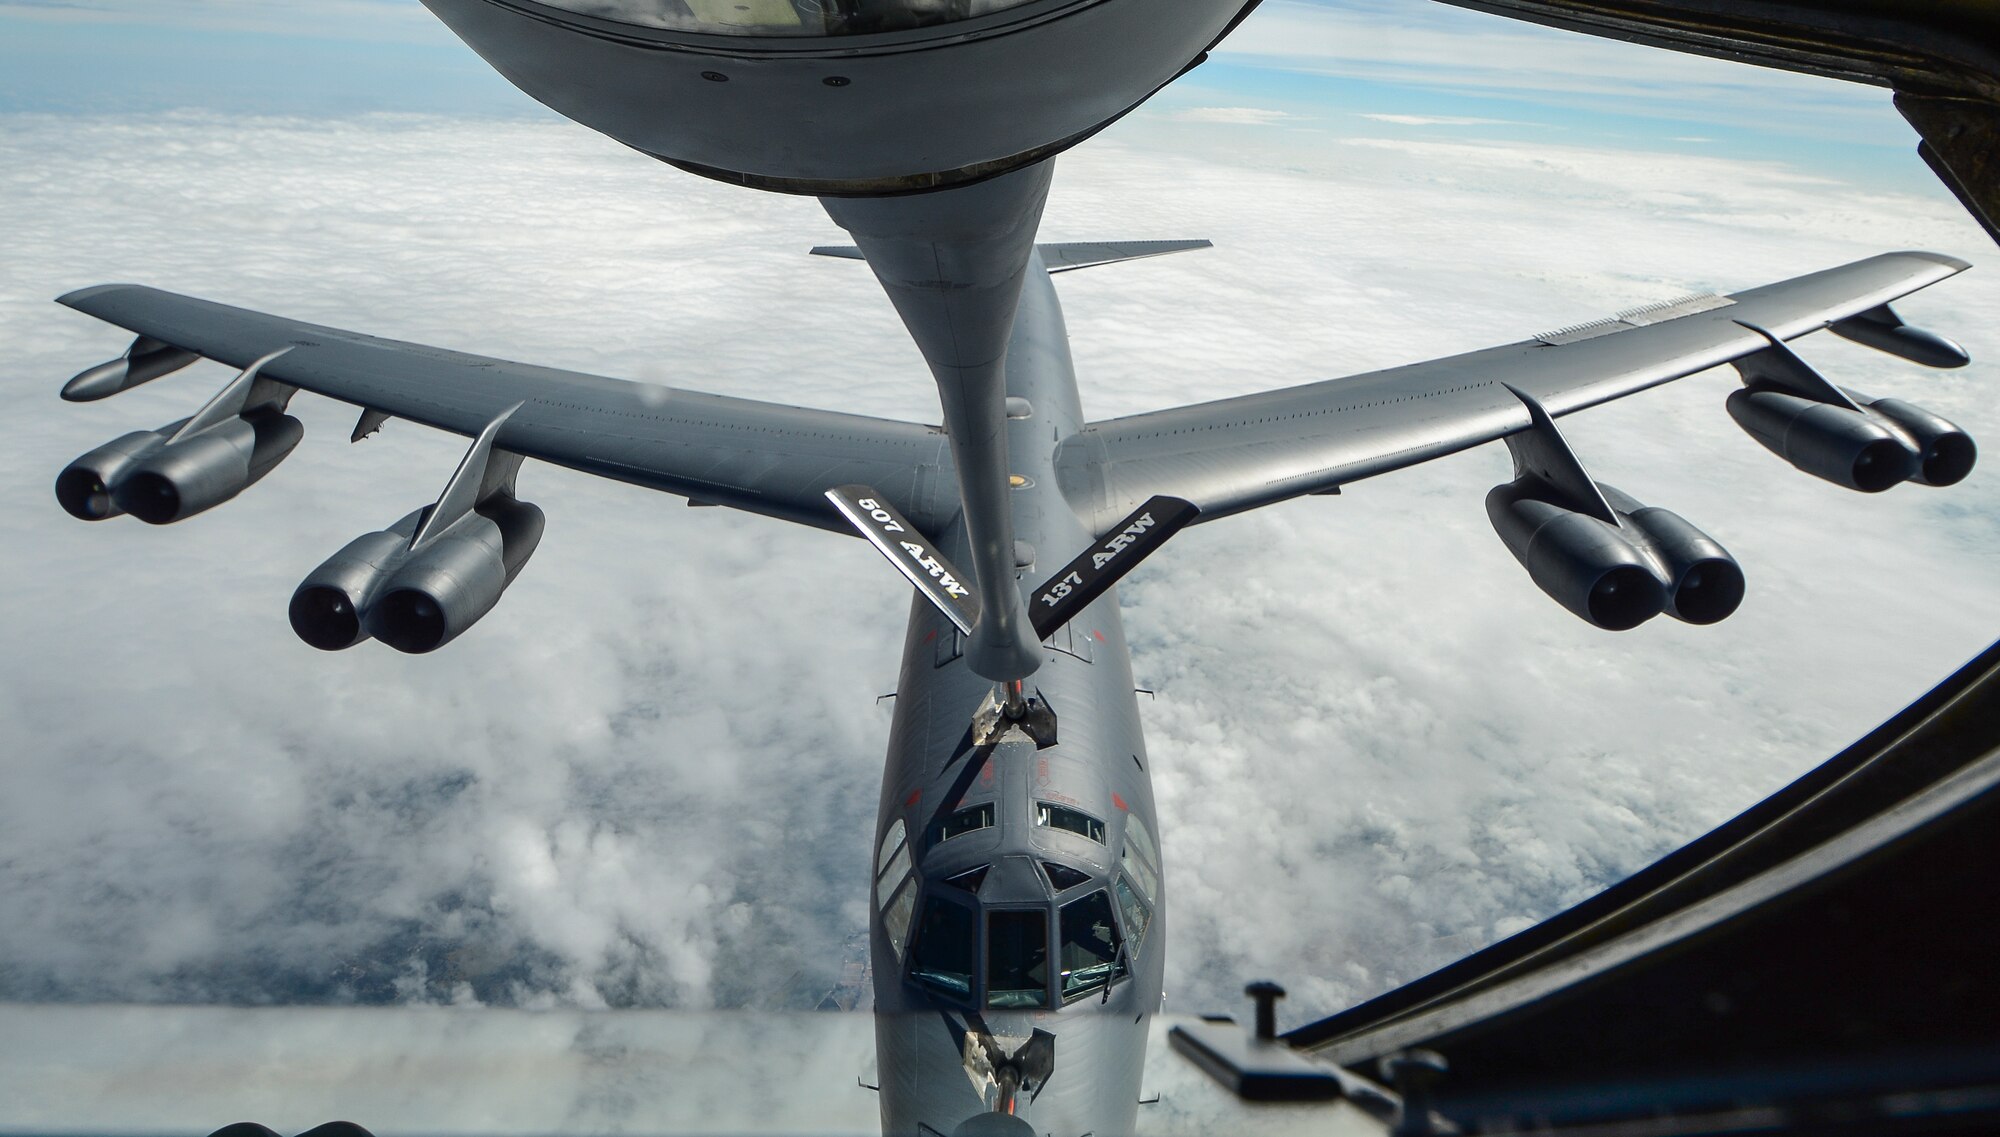 A B-52 Stratofortress receives fuel during a training mission from a KC-135R Stratotanker flown by a 465th Air Refueling Squadron crew from Tinker Air Force Base Aug. 17. (U.S. Air Force photo/Senior Airman Mark Hybers)